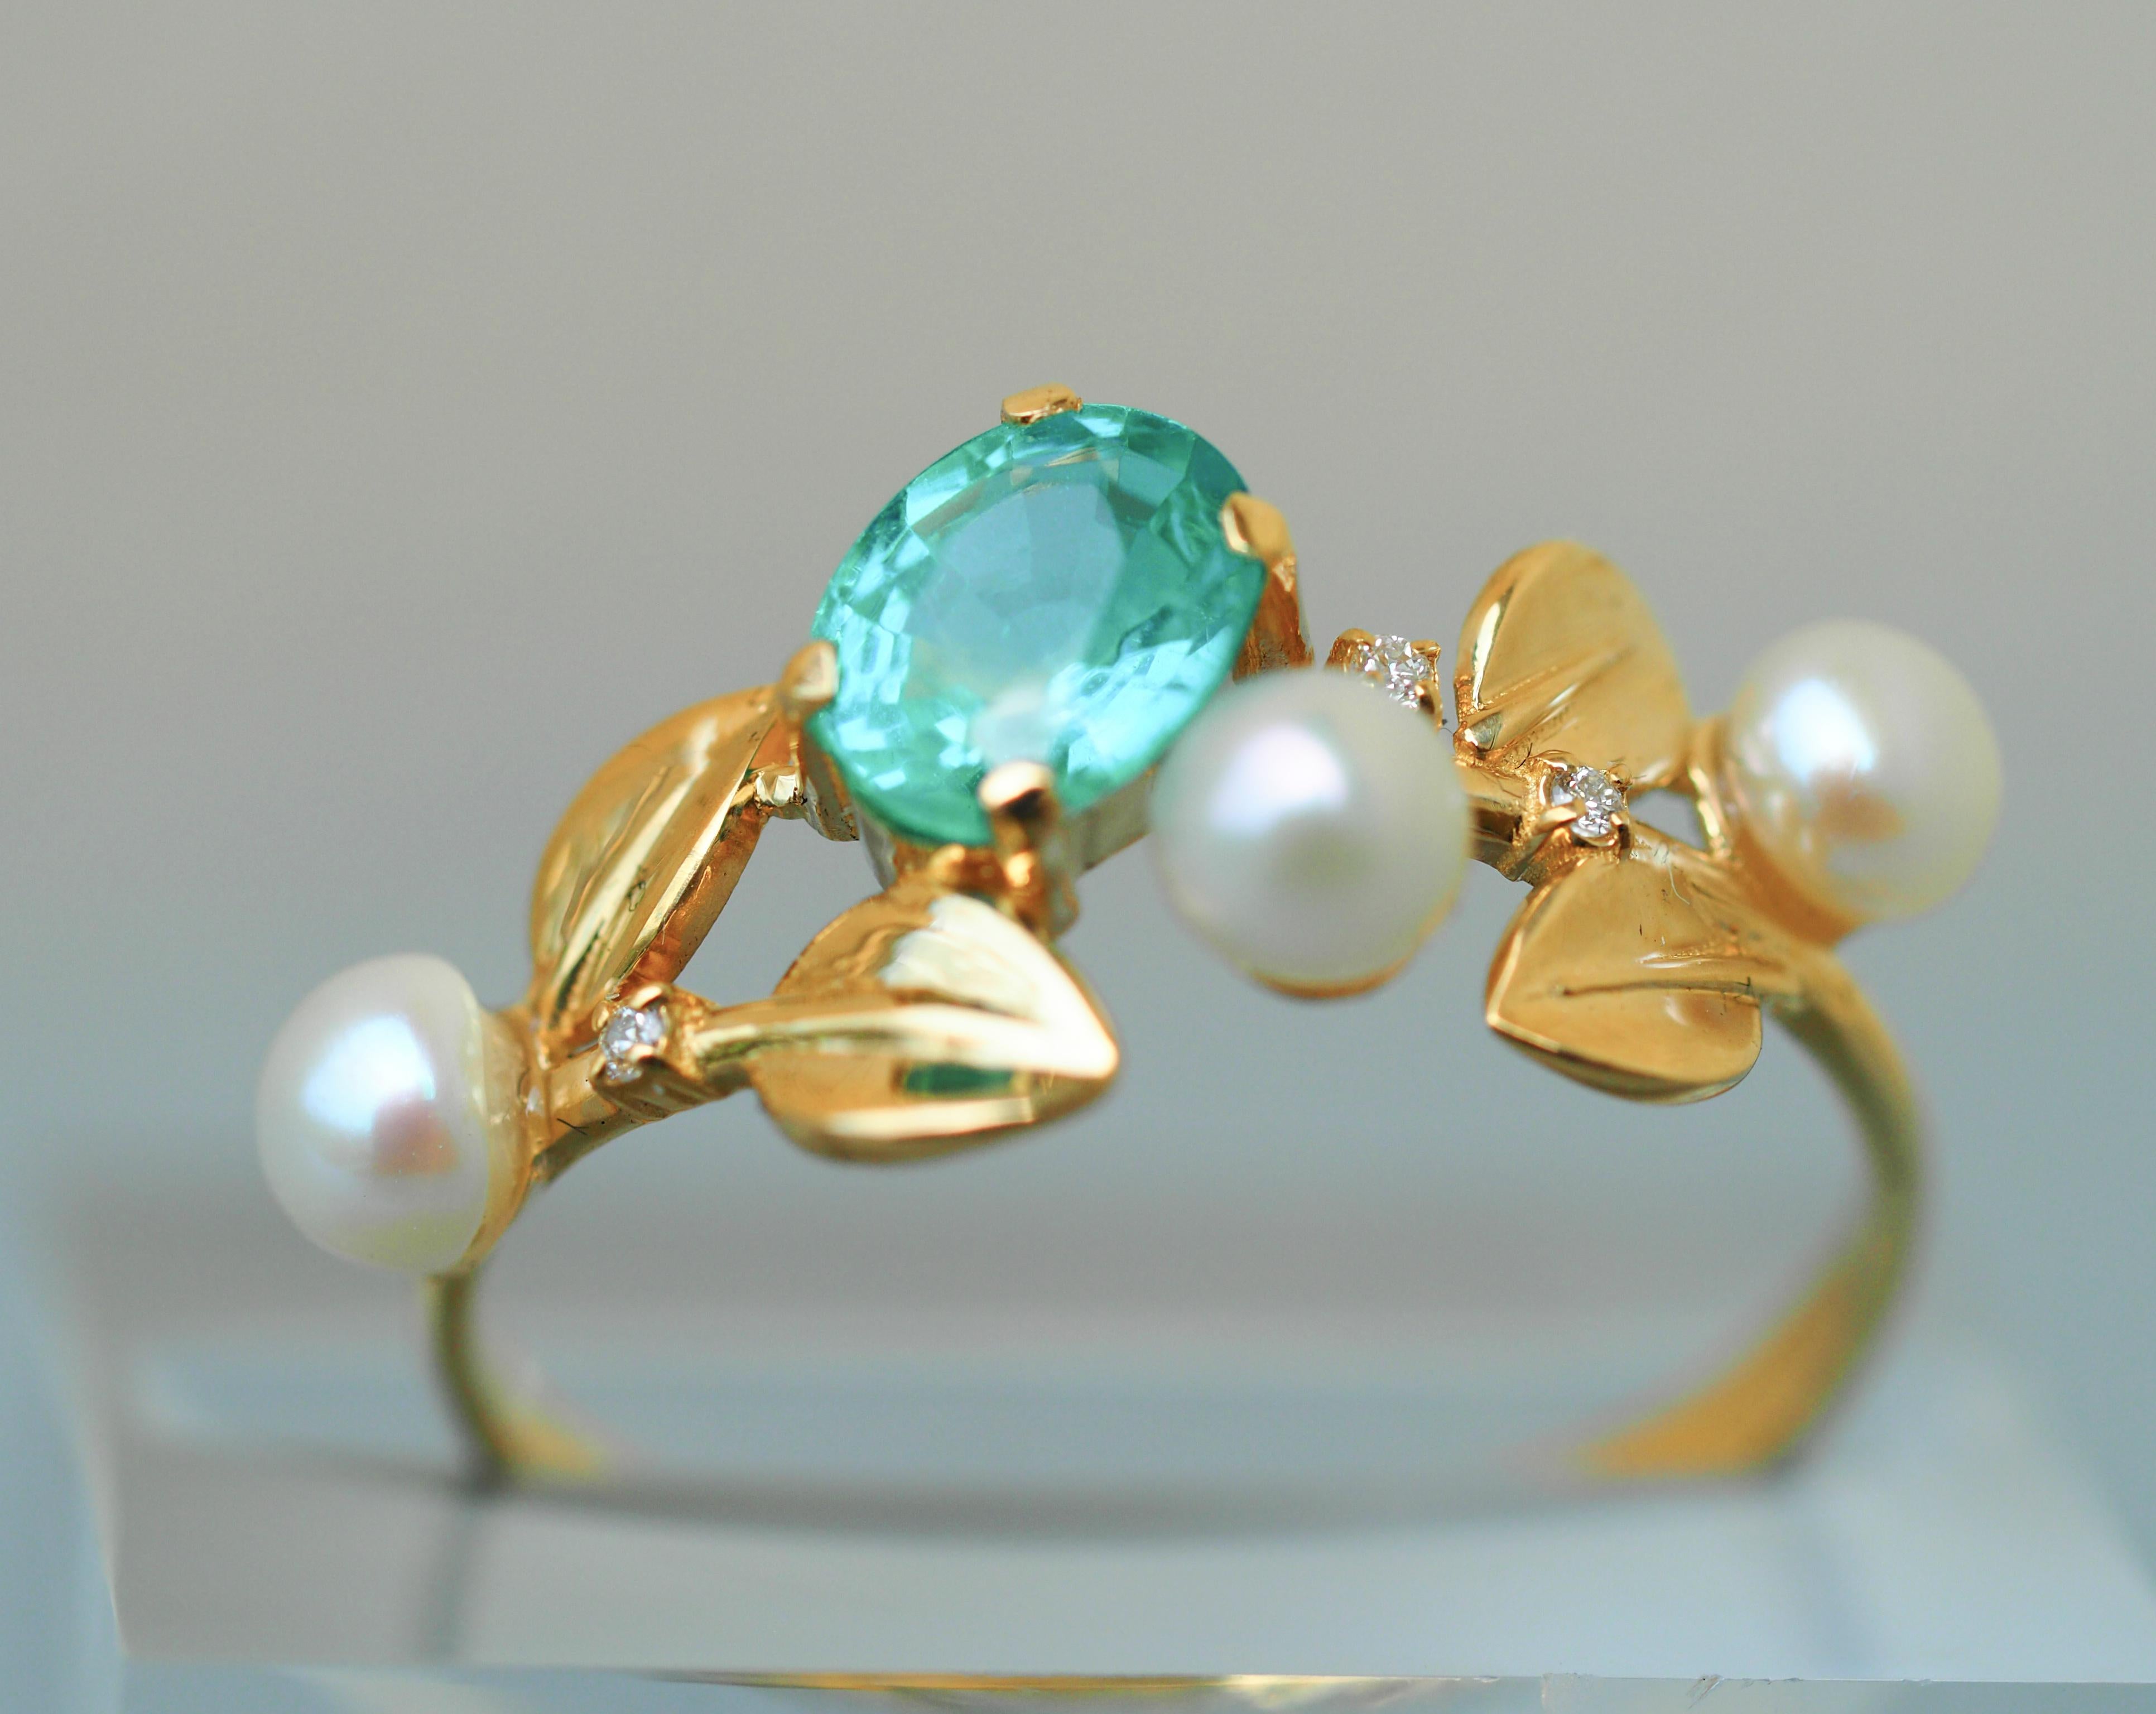 14 kt solid gold Floral ring with natural oval apatite, diamonds and pearls.
Weight: 1.8 g.

Central stone: Natural apatite
Cut: Oval
Weight: approx 0.80 ct.
Color: Paraiba blue
Clarity: Transparent with inclusions (See in photo)
Diamonds: G/VS1,